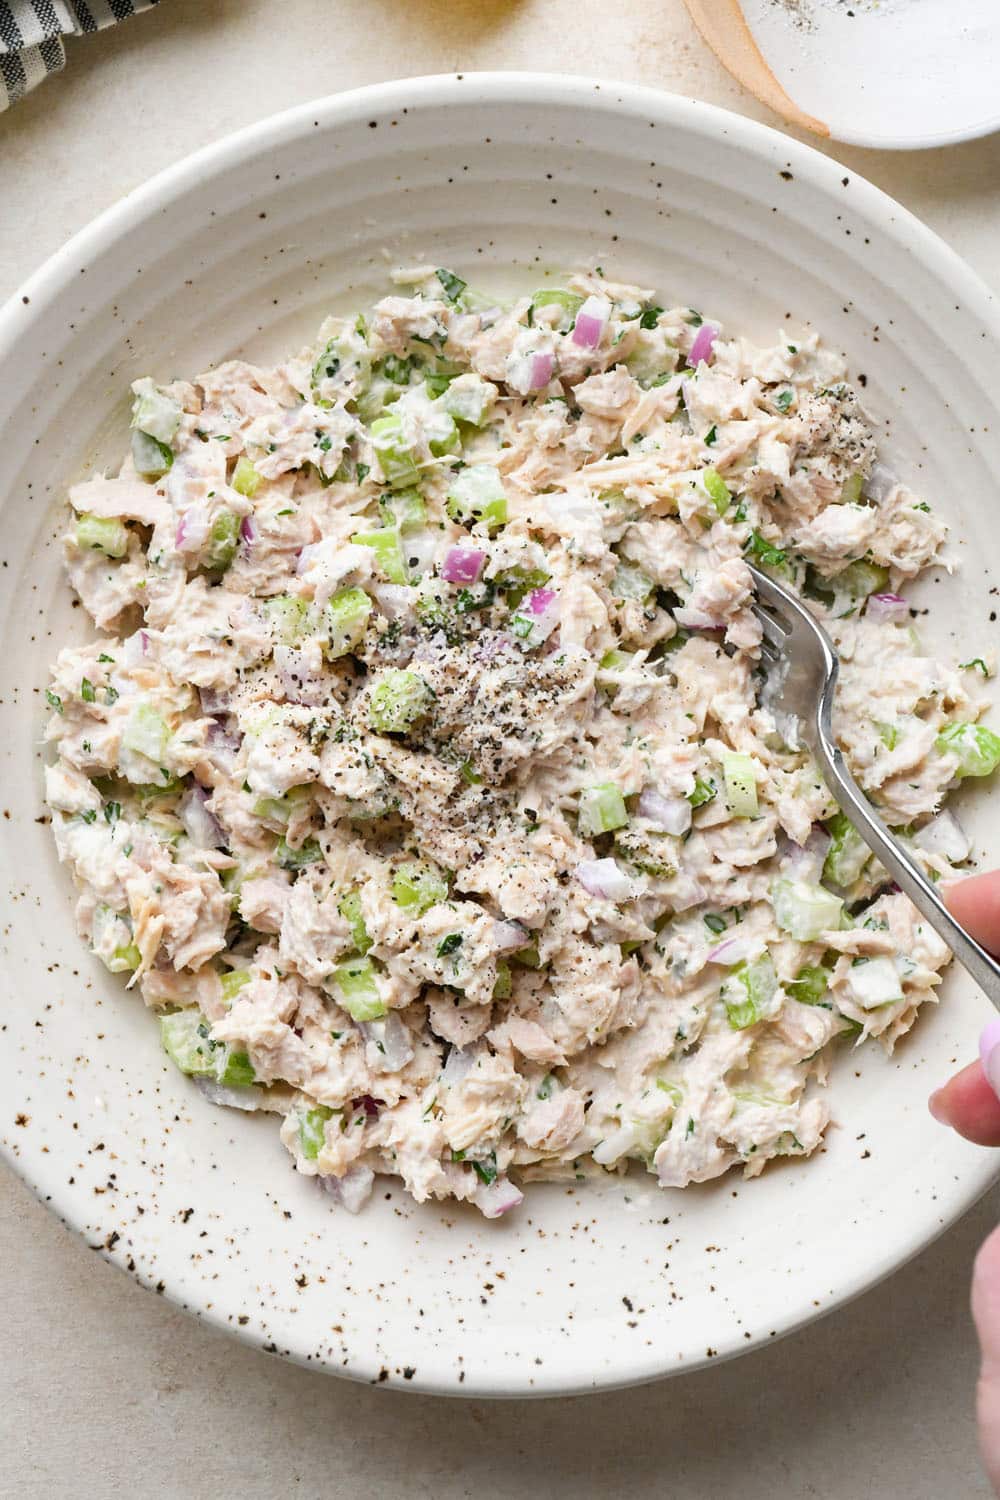 How to make tuna salad: All ingredients for tuna salad mixed together in a large bowl, seasoned with salt and pepper.